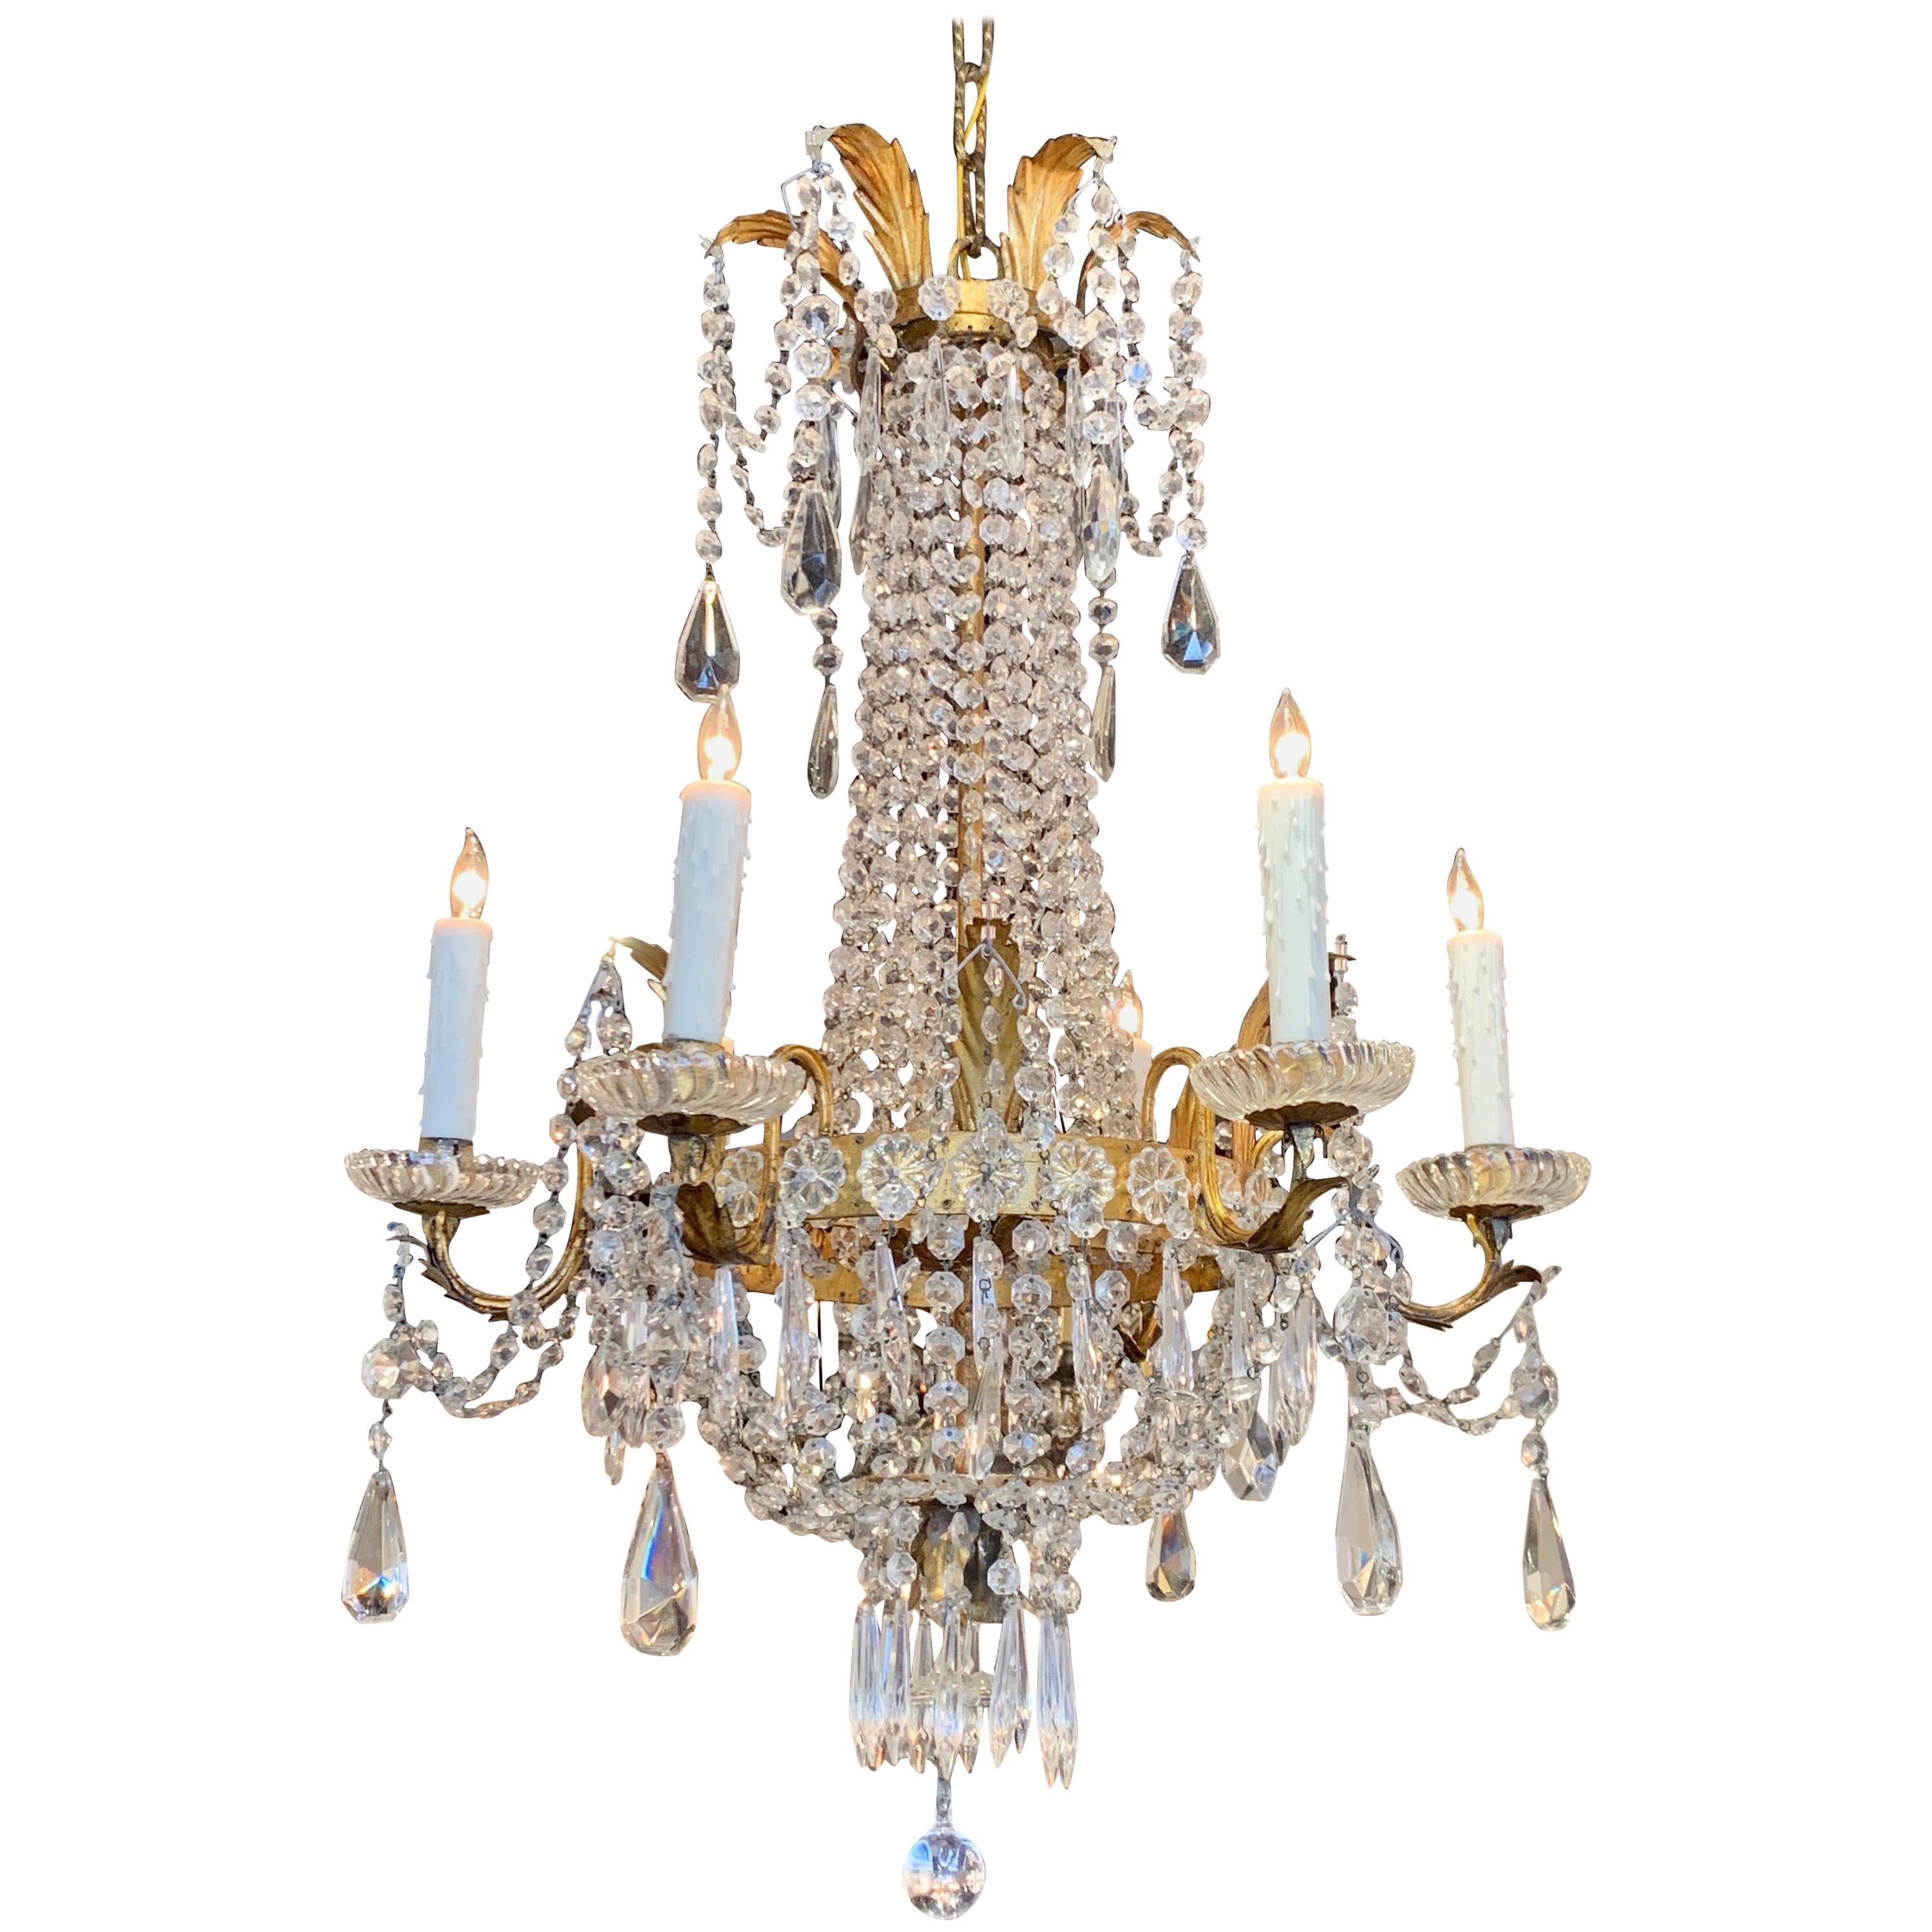 Late 19th Century Italian Empire Style Crystal Chandelier with 6 Lights